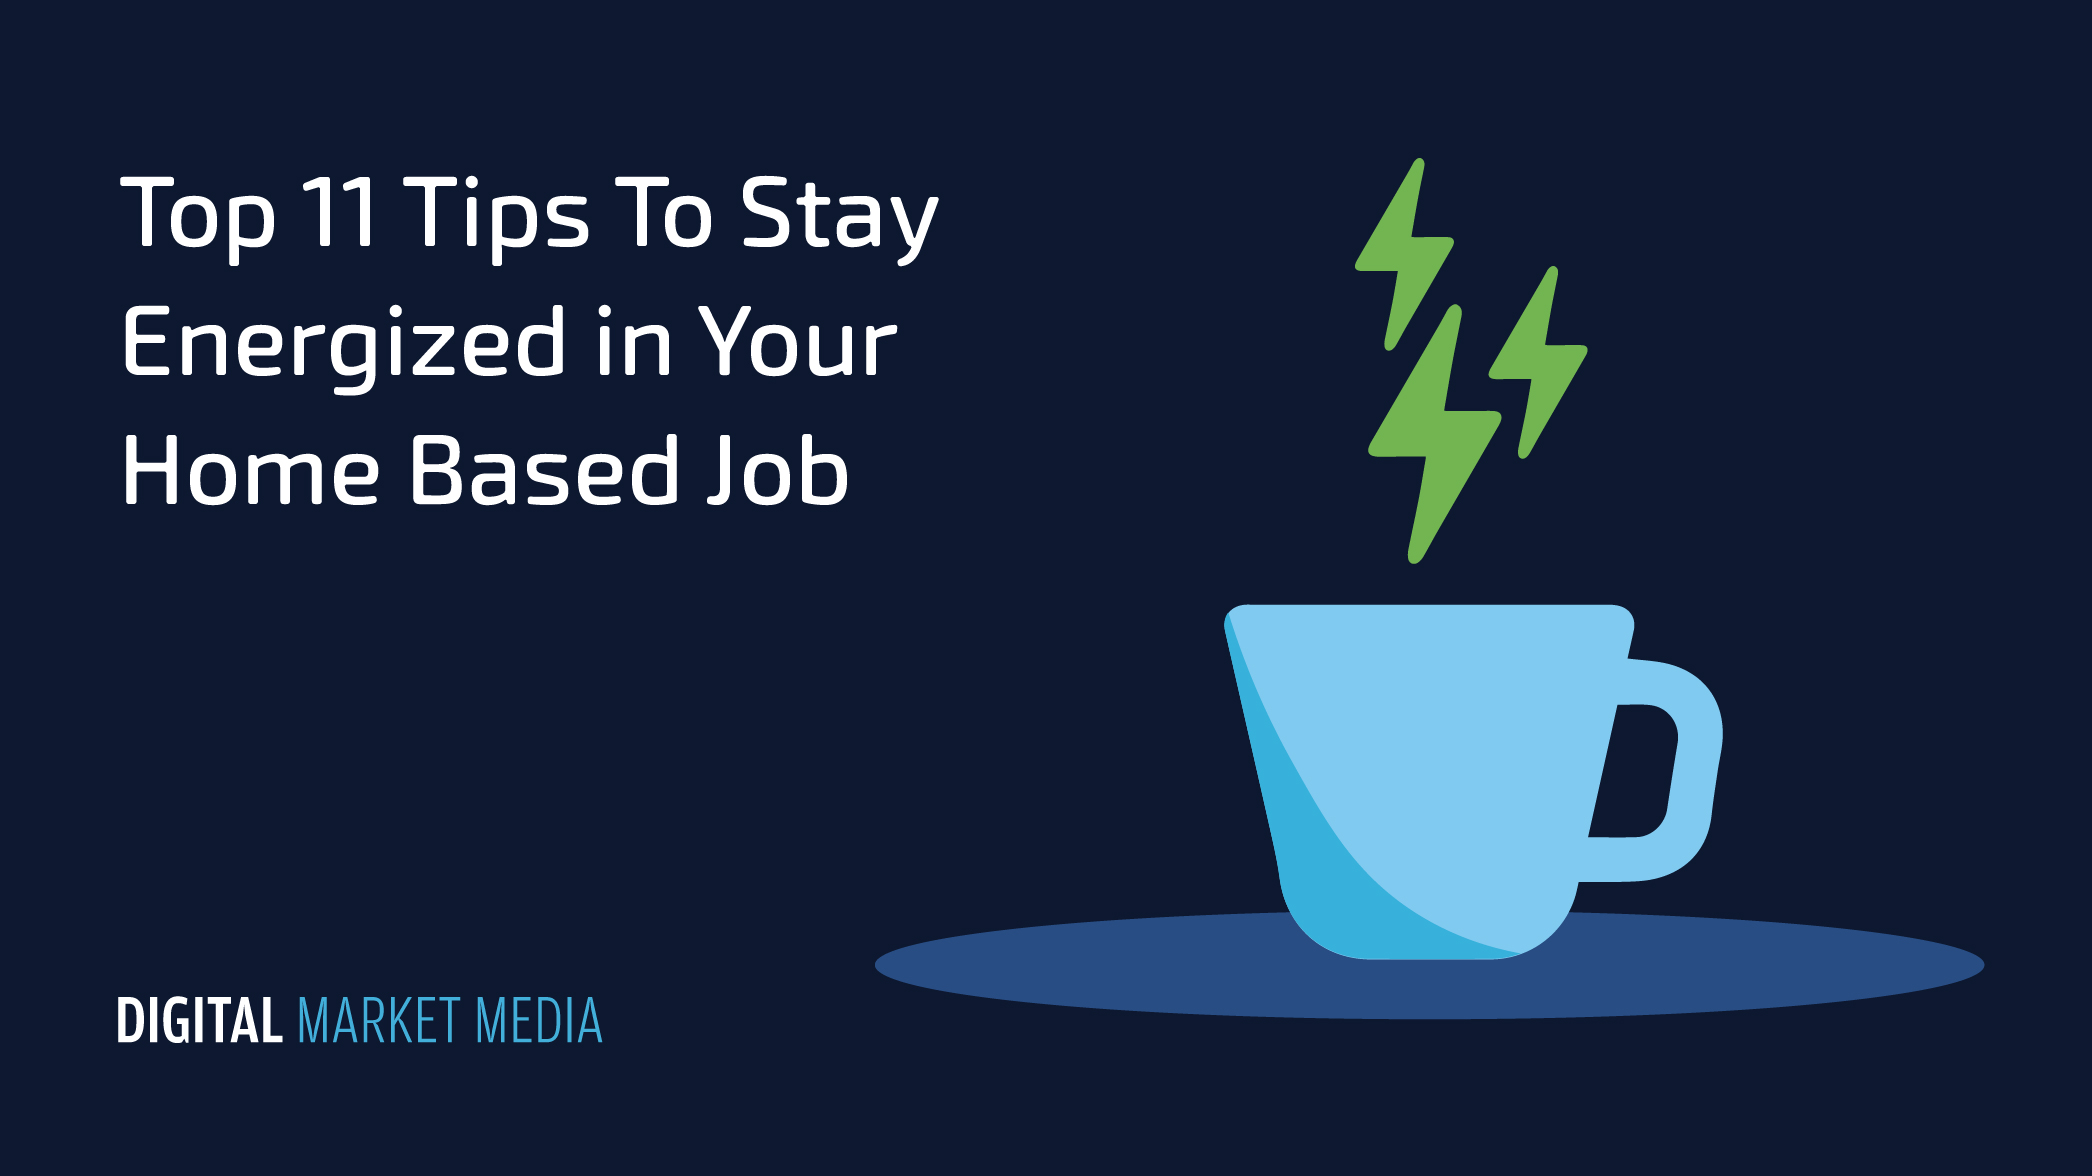 Top 11 Tips to Stay Energized in Your Home Based Job